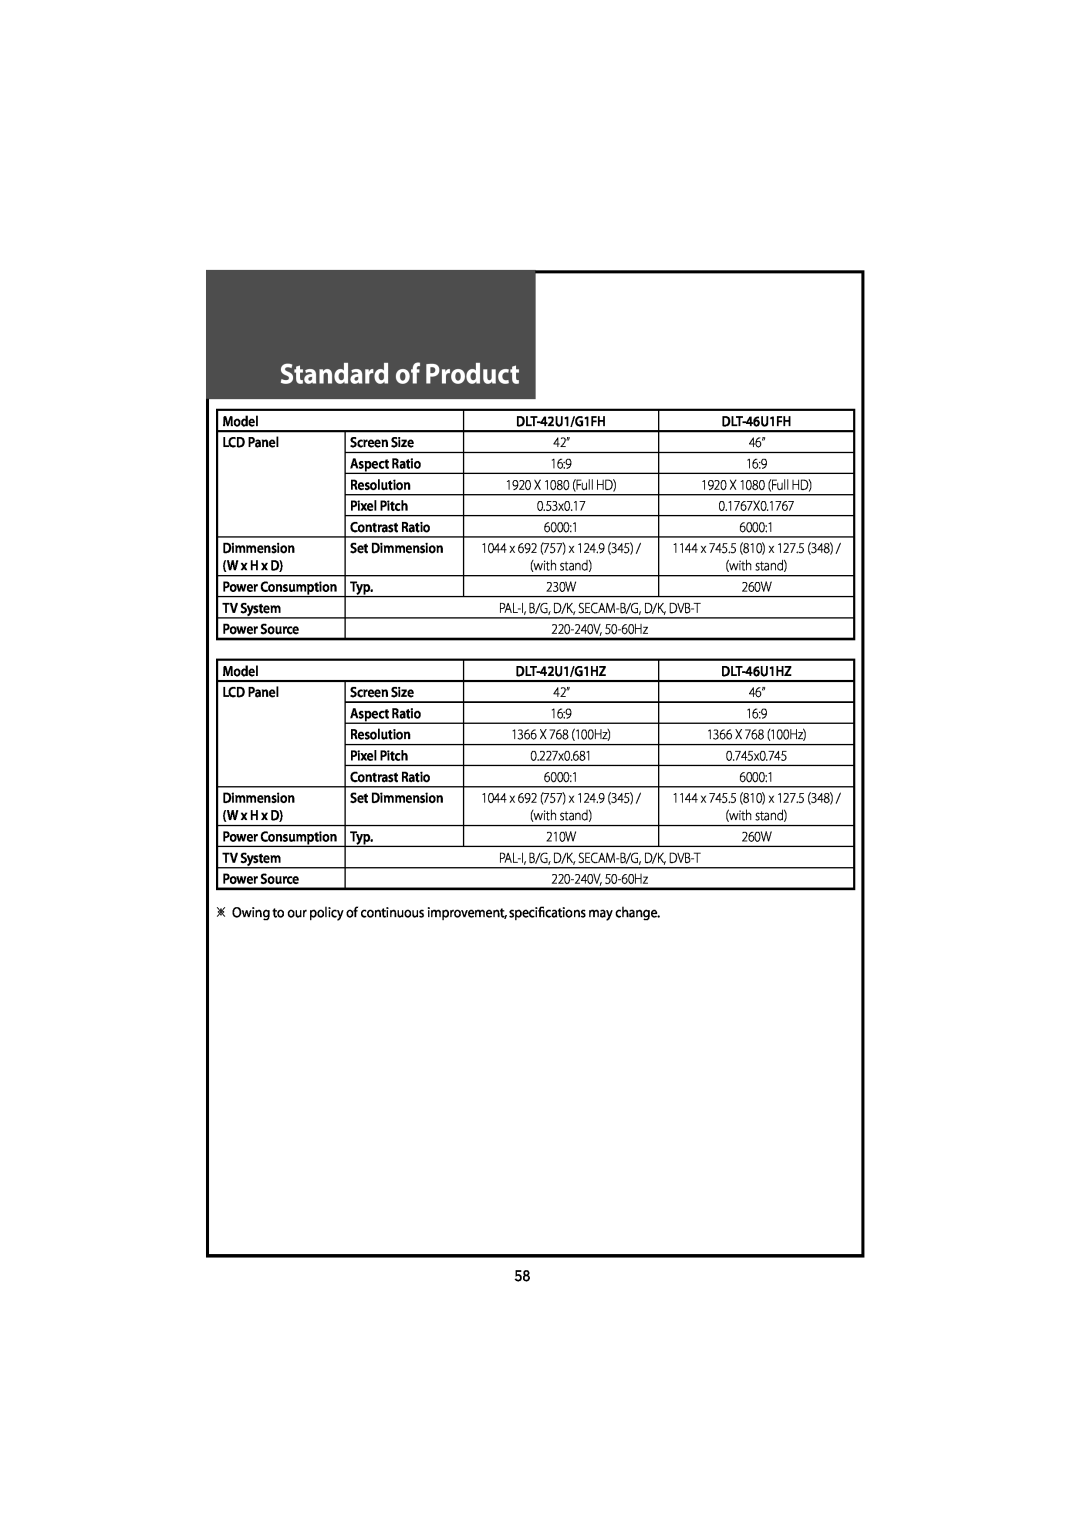 Daewoo DLT-46U1HZ, DLT-42U1/G1FH, DLT-46U1FH, DLT-42U1/G1HZ instruction manual Standard of Product 